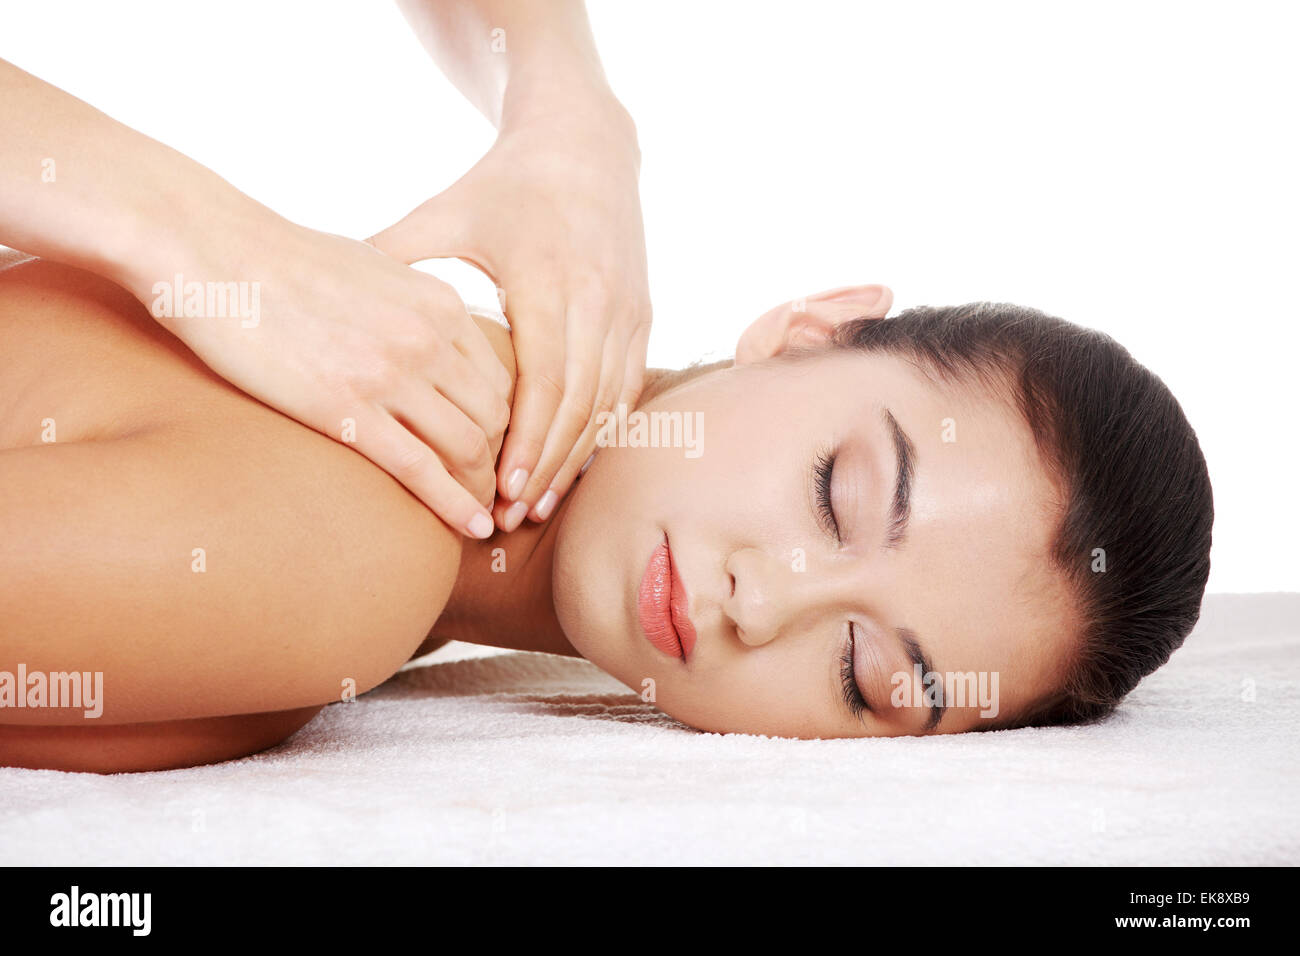 Preaty young woman relaxing in spa saloon Stock Photo